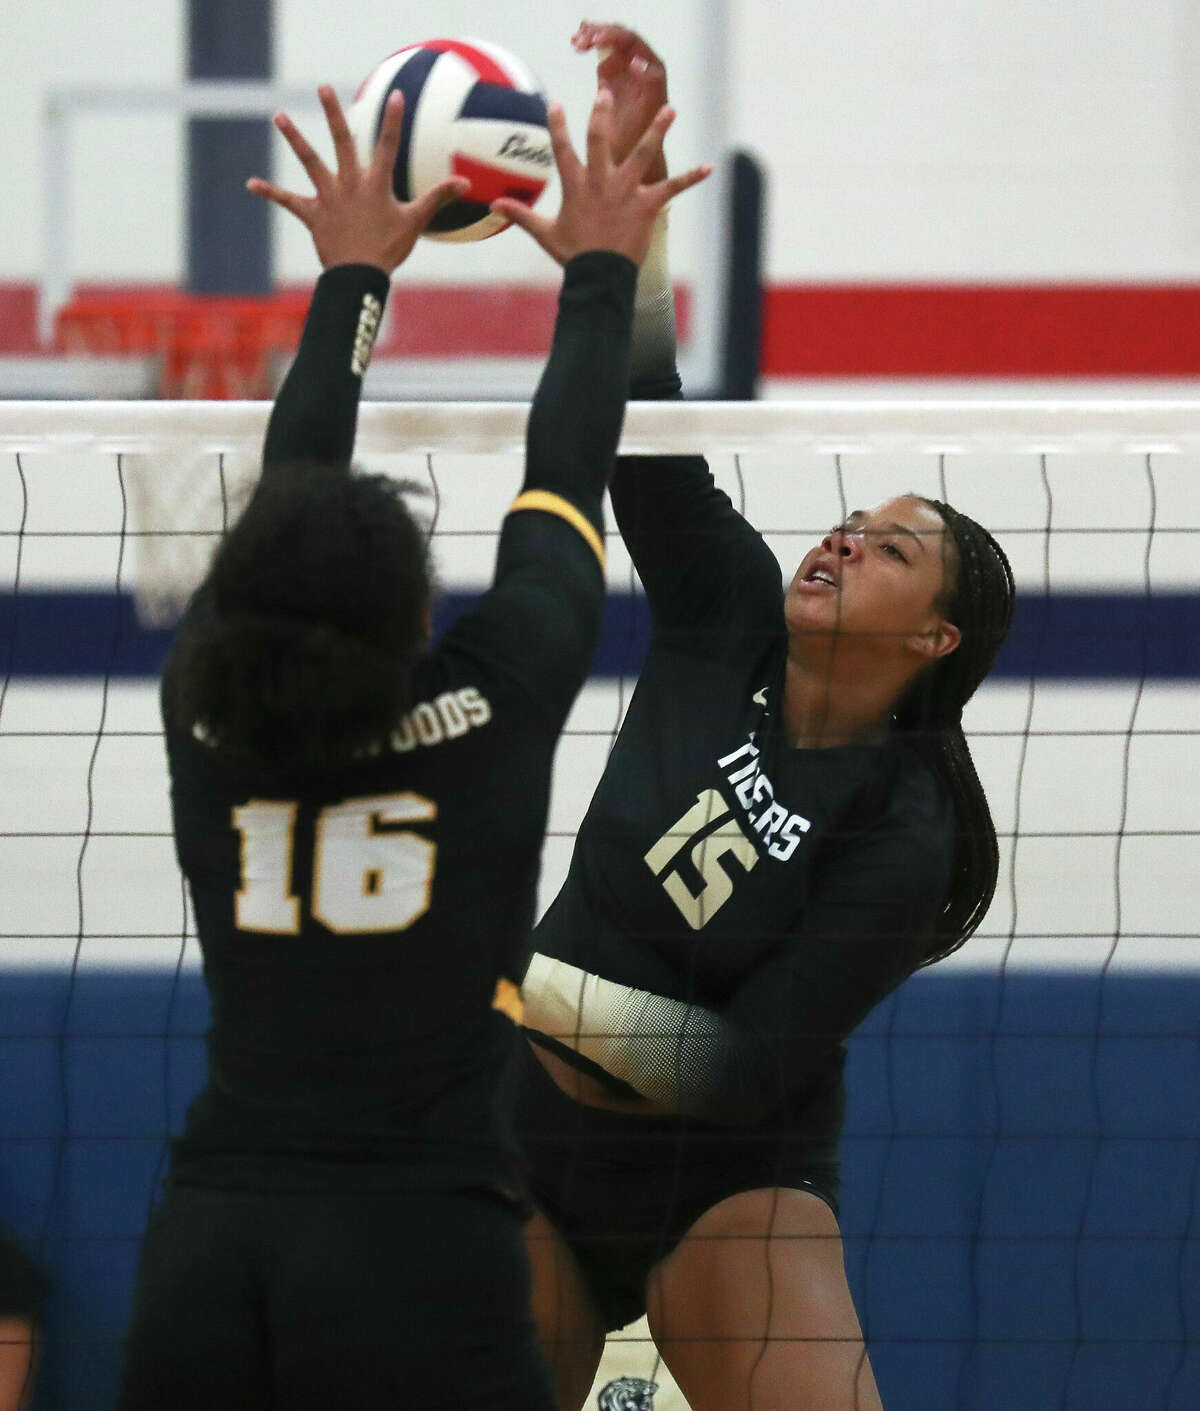 Conroe's Ariana Brown (15) scores a point in the first set of a non-district high school volleyball match, Thursday, Aug. 18, 2022, in Houston.